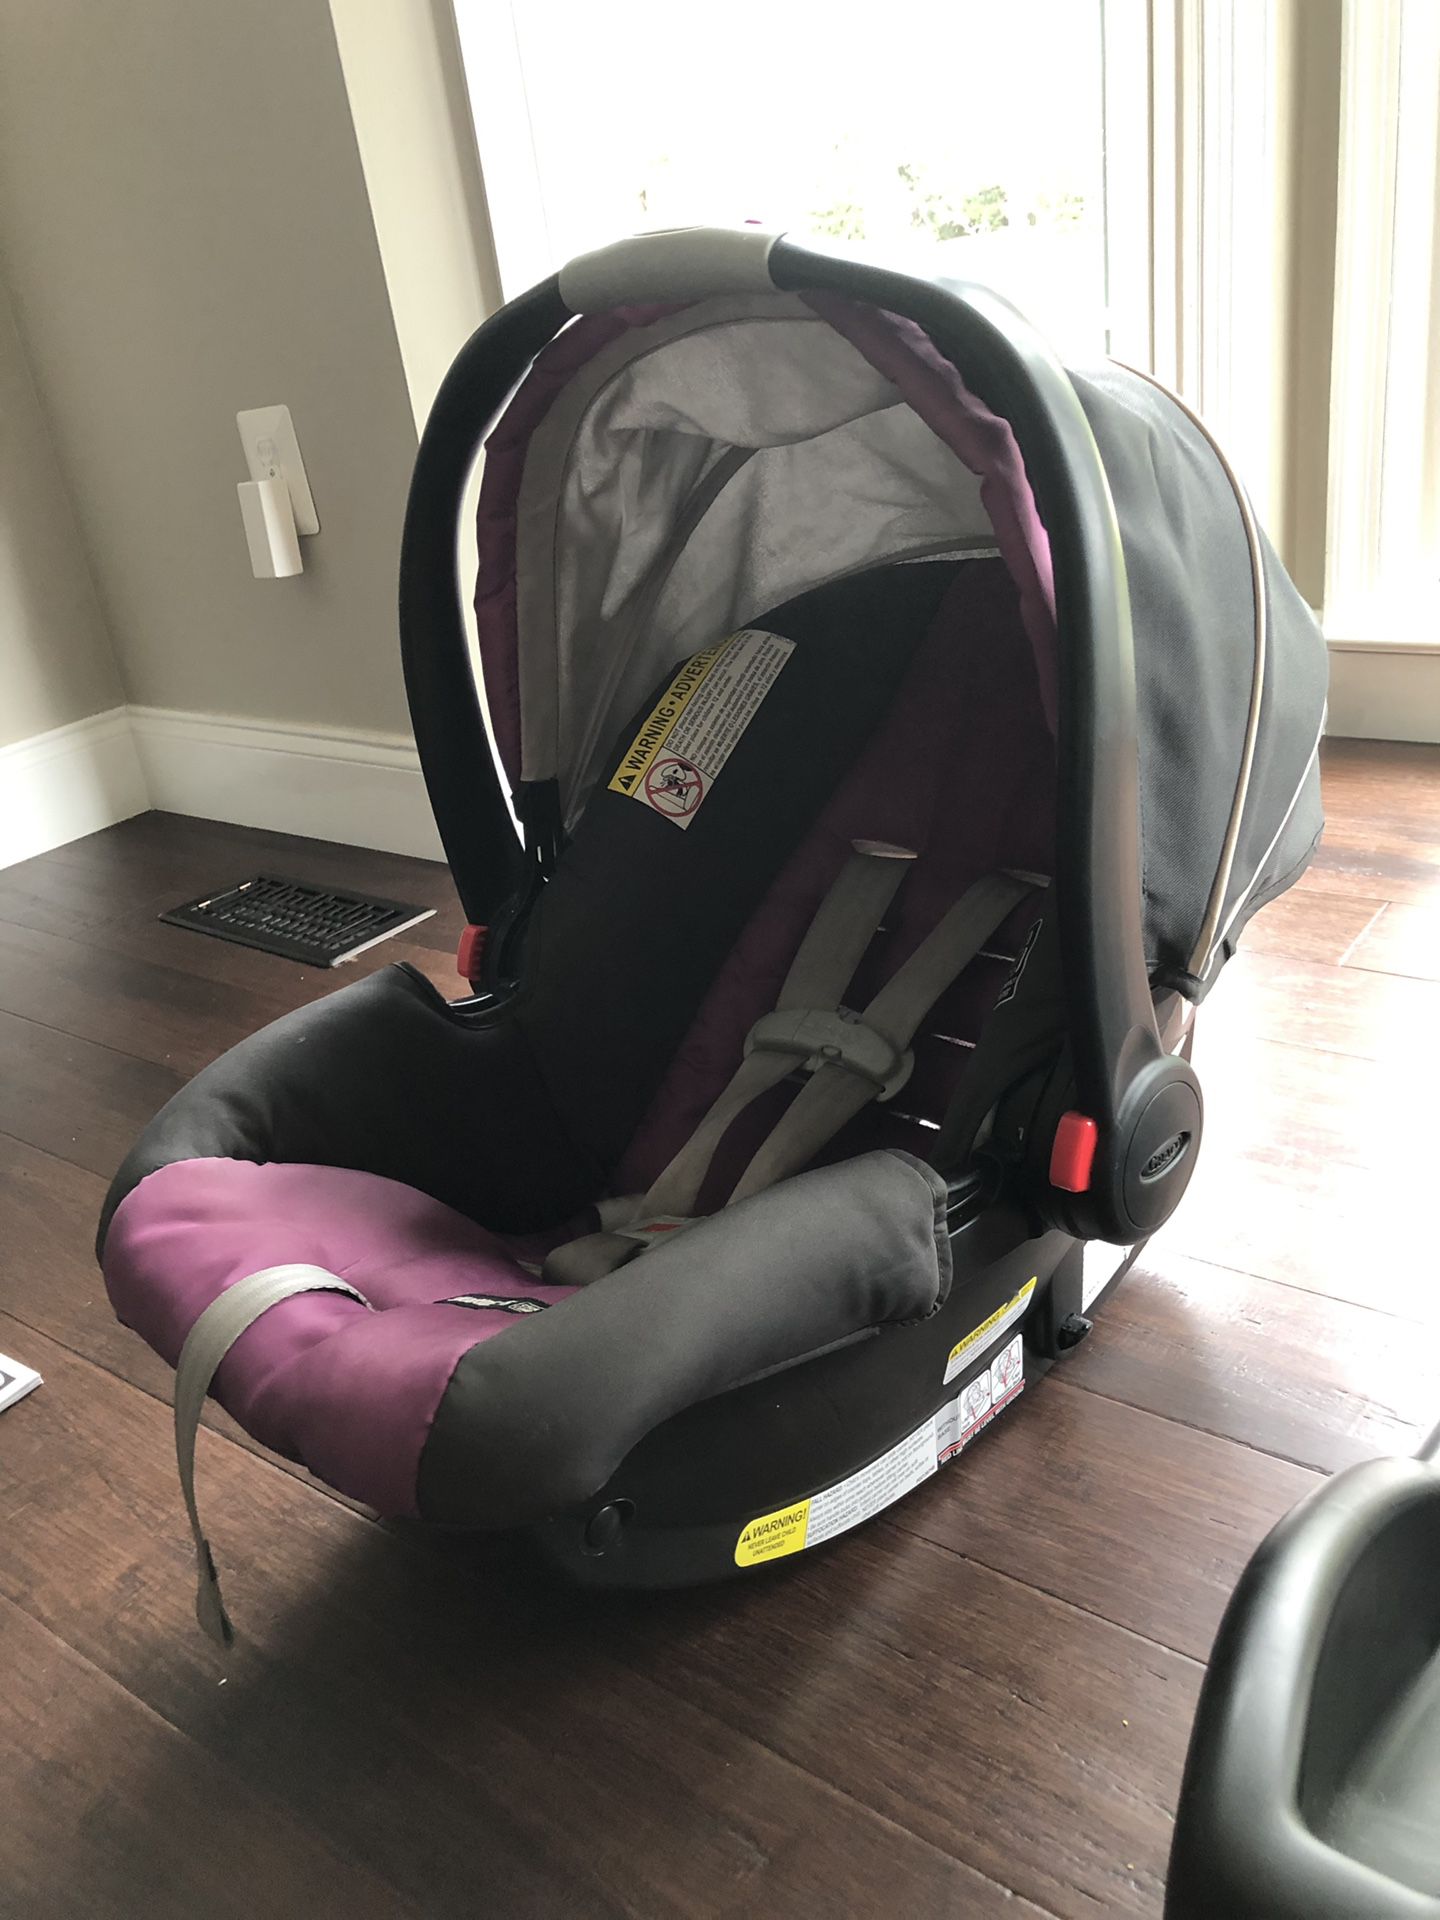 Graco Snugride click connect 35 infant car seat with base